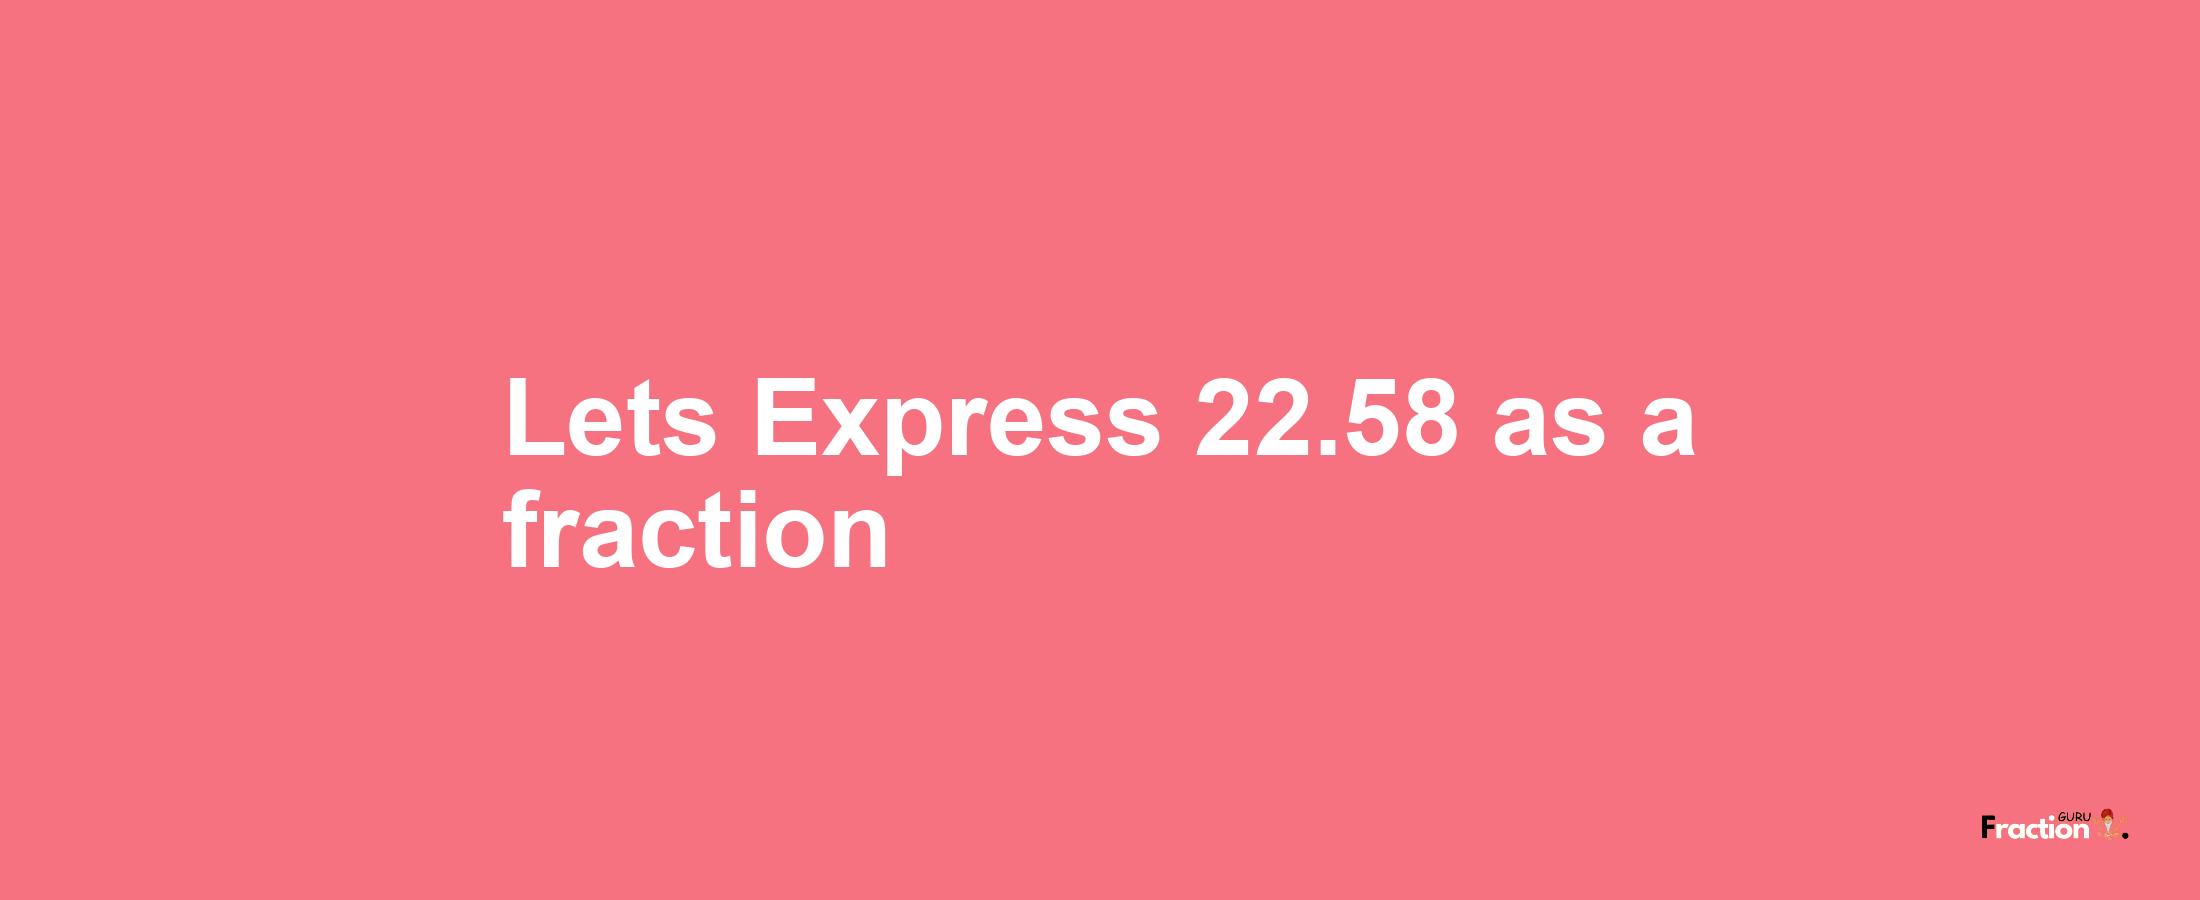 Lets Express 22.58 as afraction